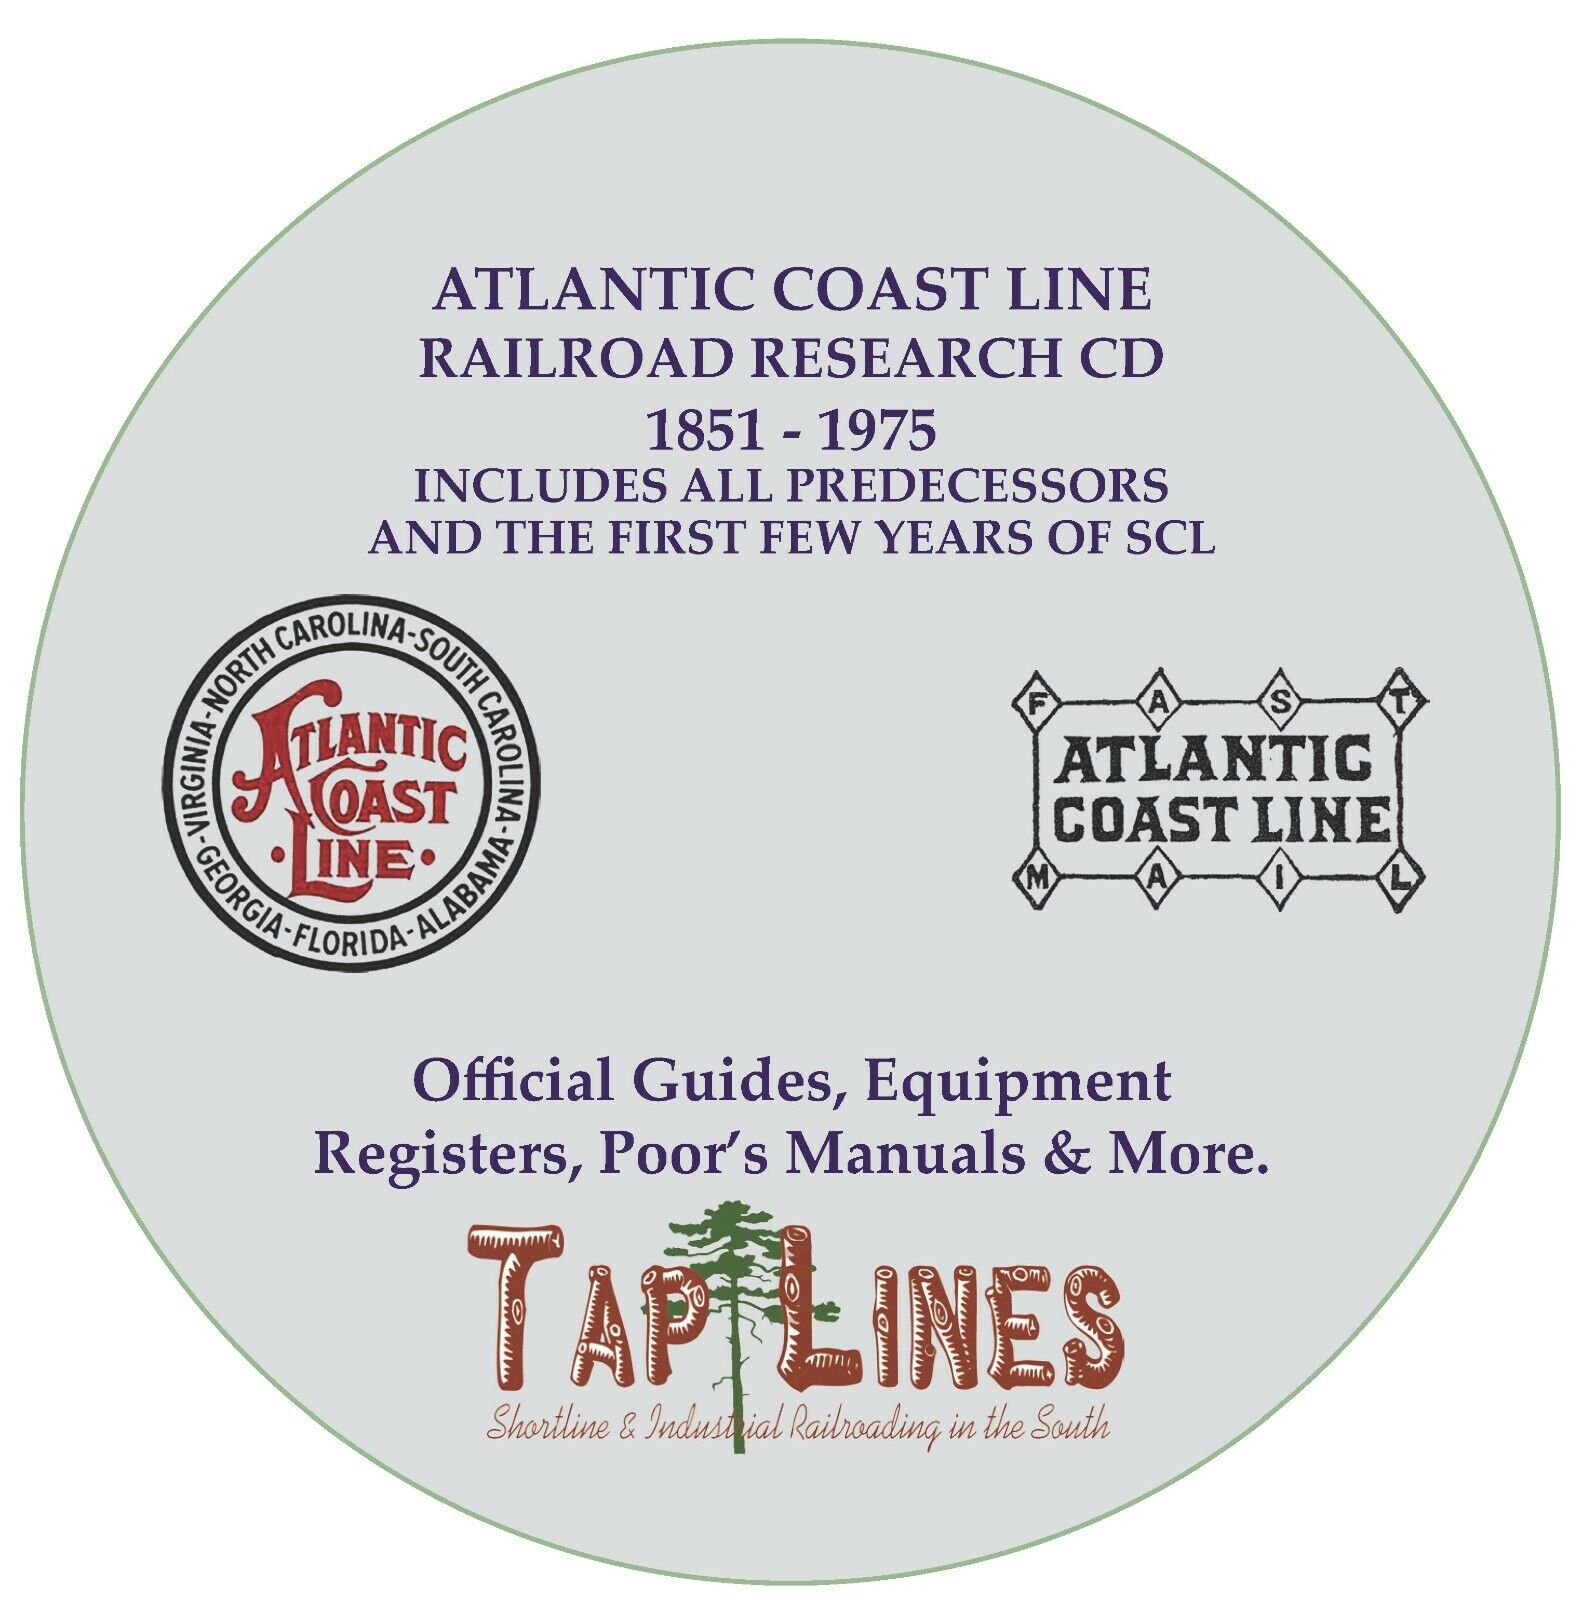 ATLANTIC COAST LINE & PREDECESSORS HISTORICAL RESEARCH SCANNED TO DVD 